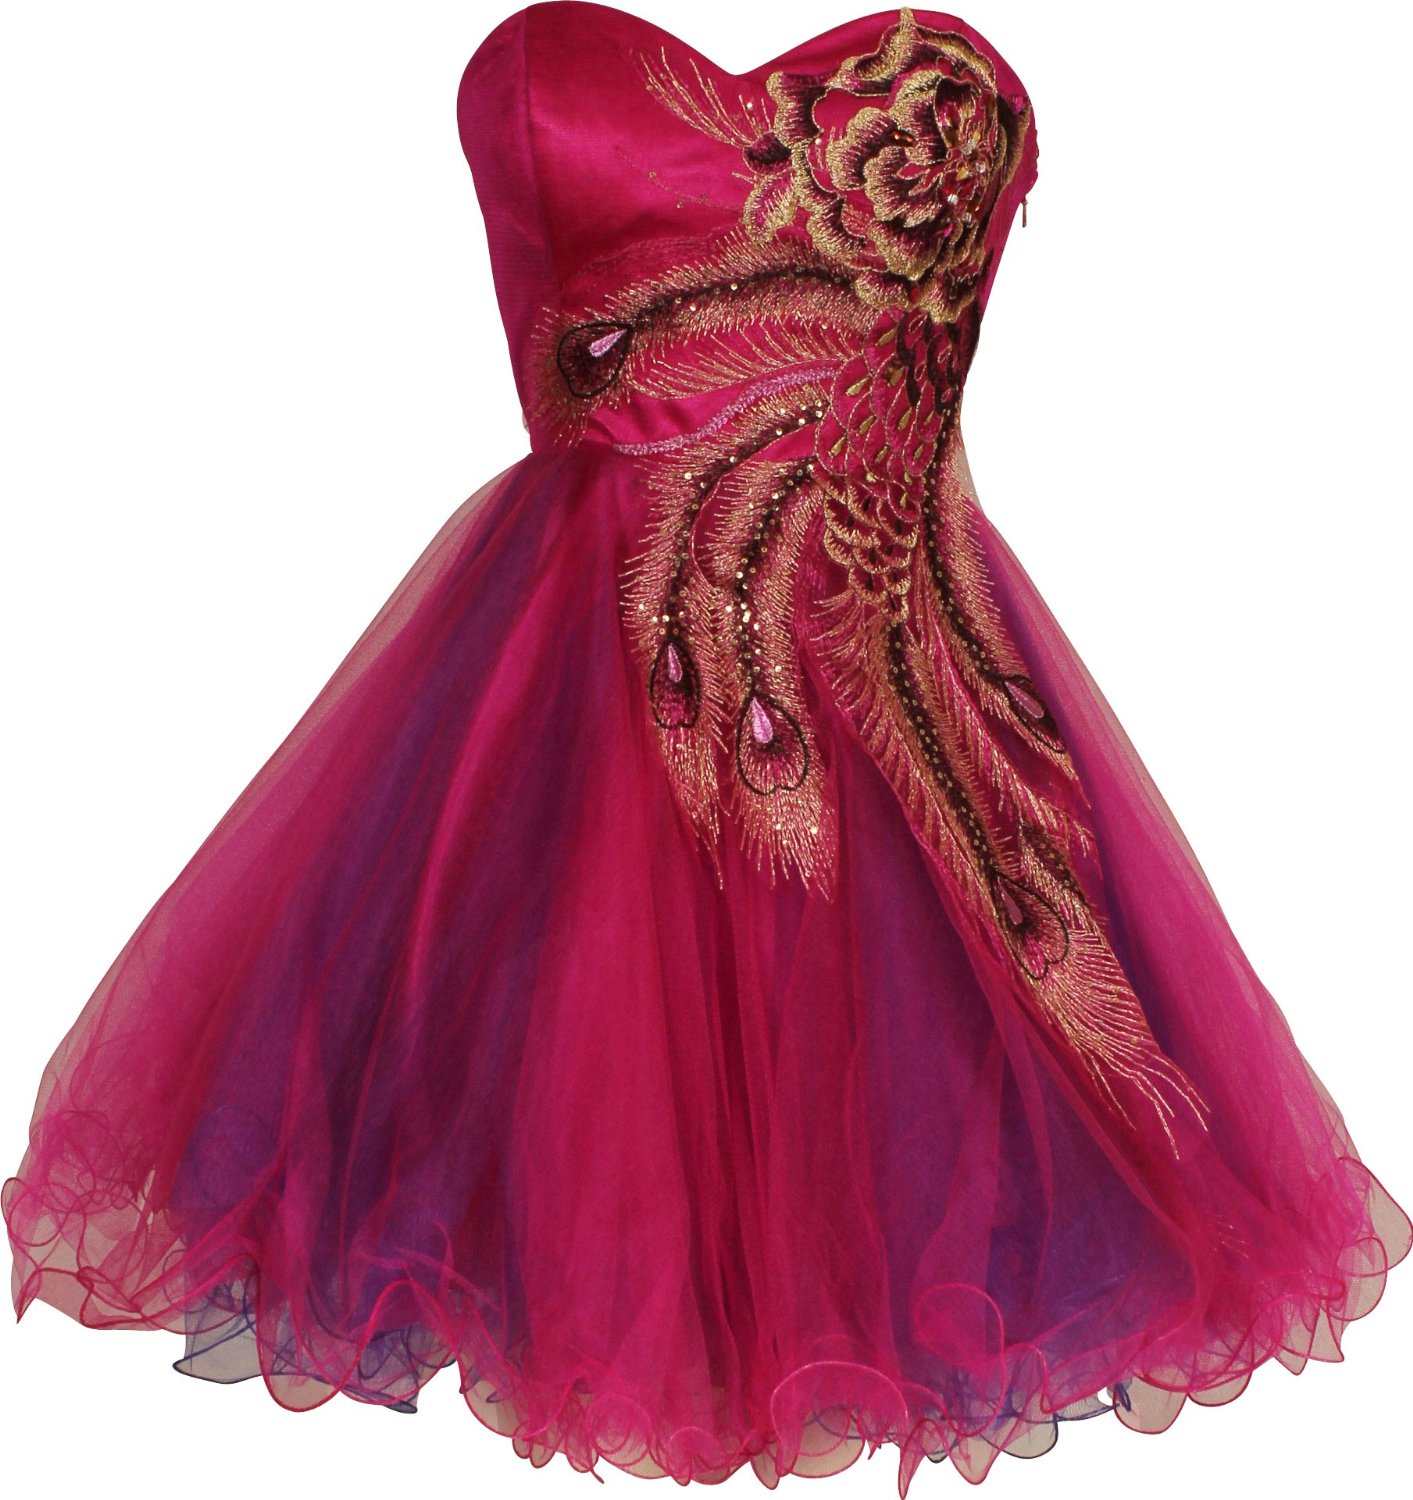 Fuchsia peacock party prom gowns, short prom dresses